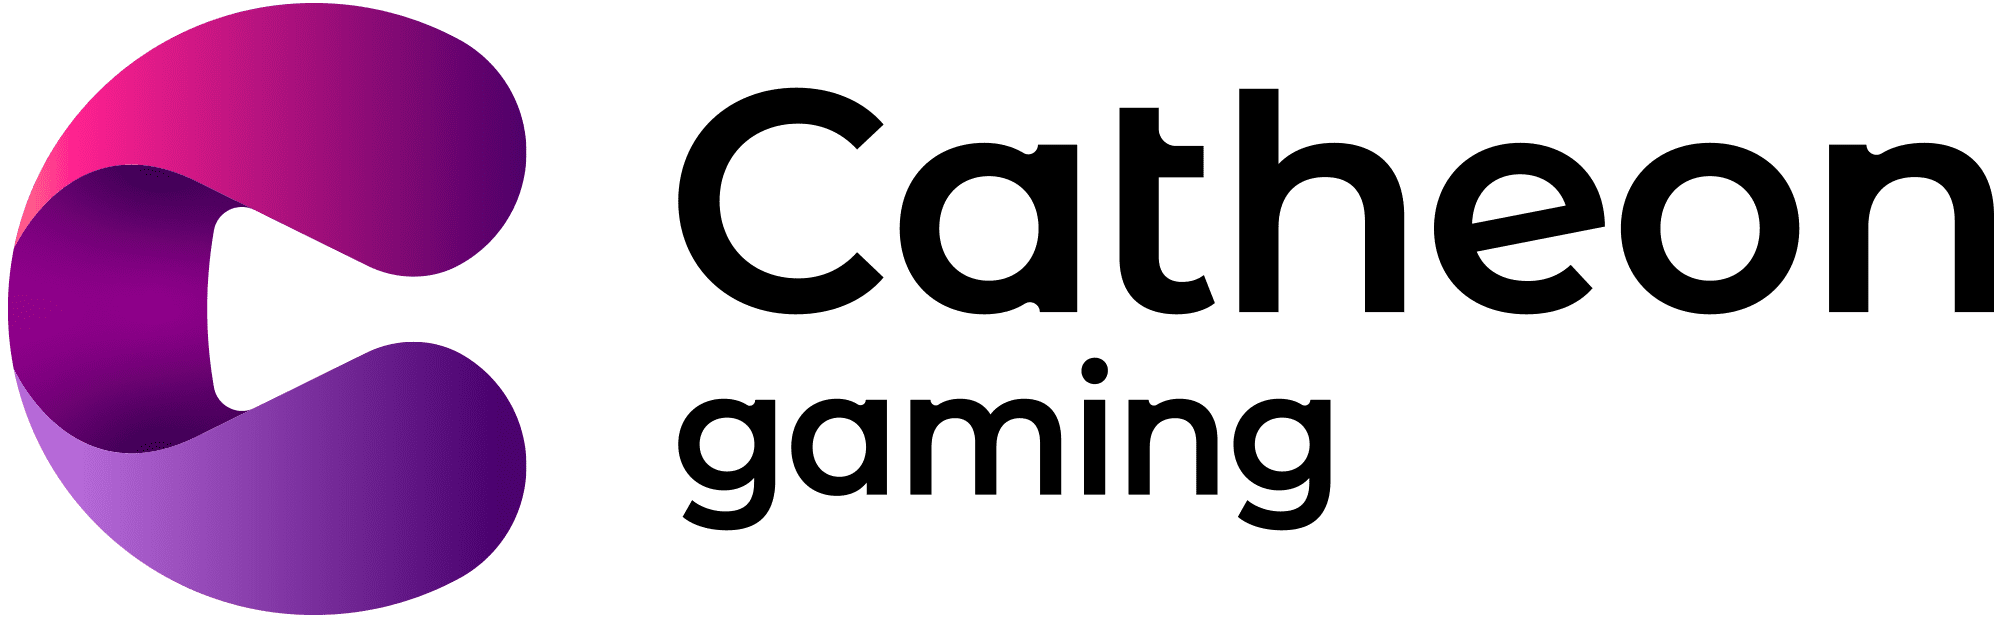 , Catheon Gaming ranked by KPMG &amp; HSBC as the #1 Emerging Giant in the blockchain sector and the top 10 Emerging Giants in Asia Pacific